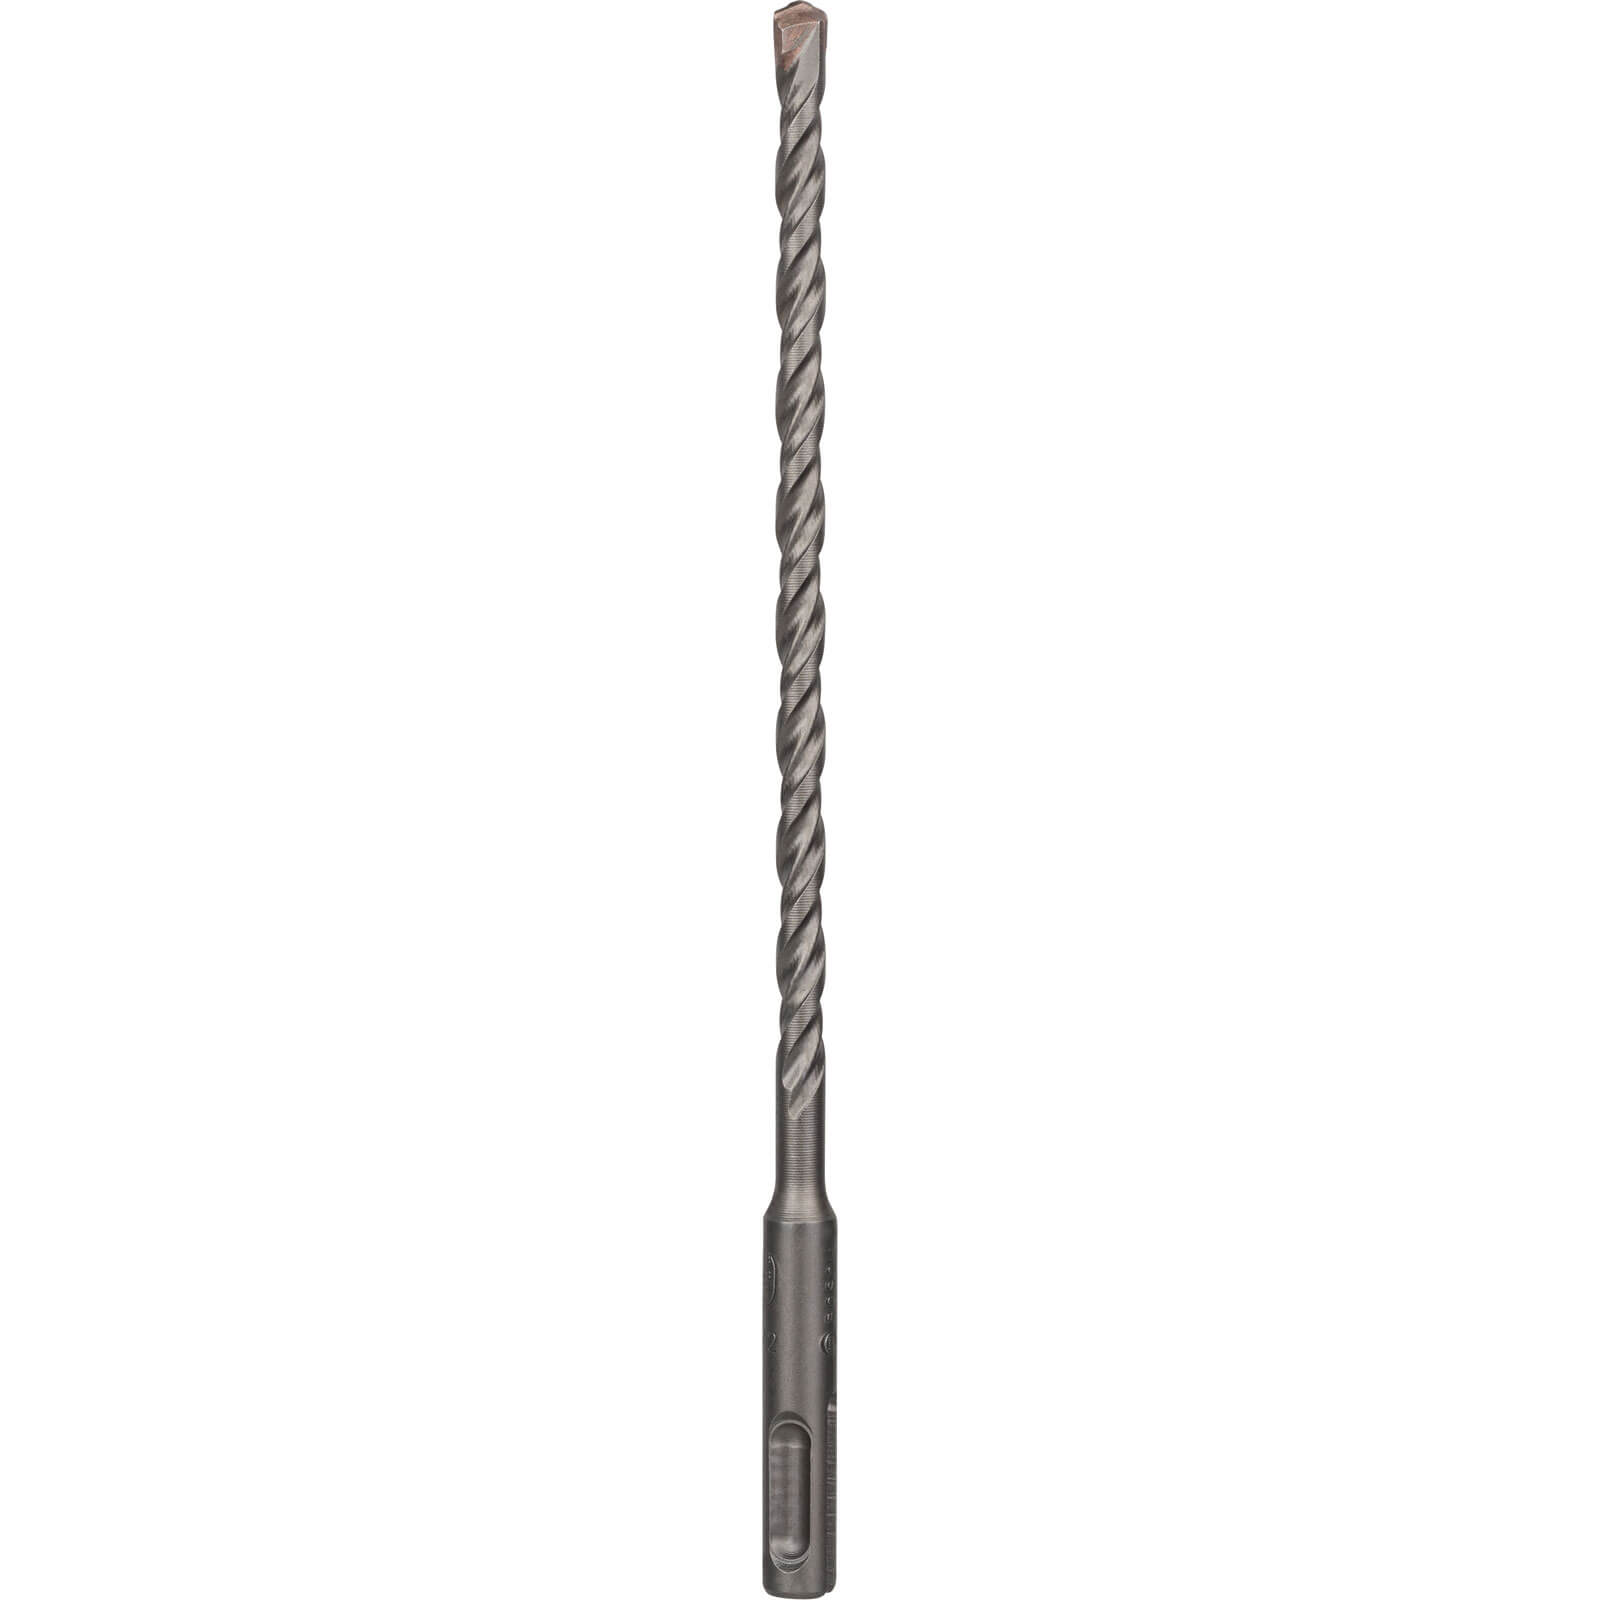 Image of Bosch Series 3 SDS Plus Masonry Drill Bit 7mm 160mm Pack of 10